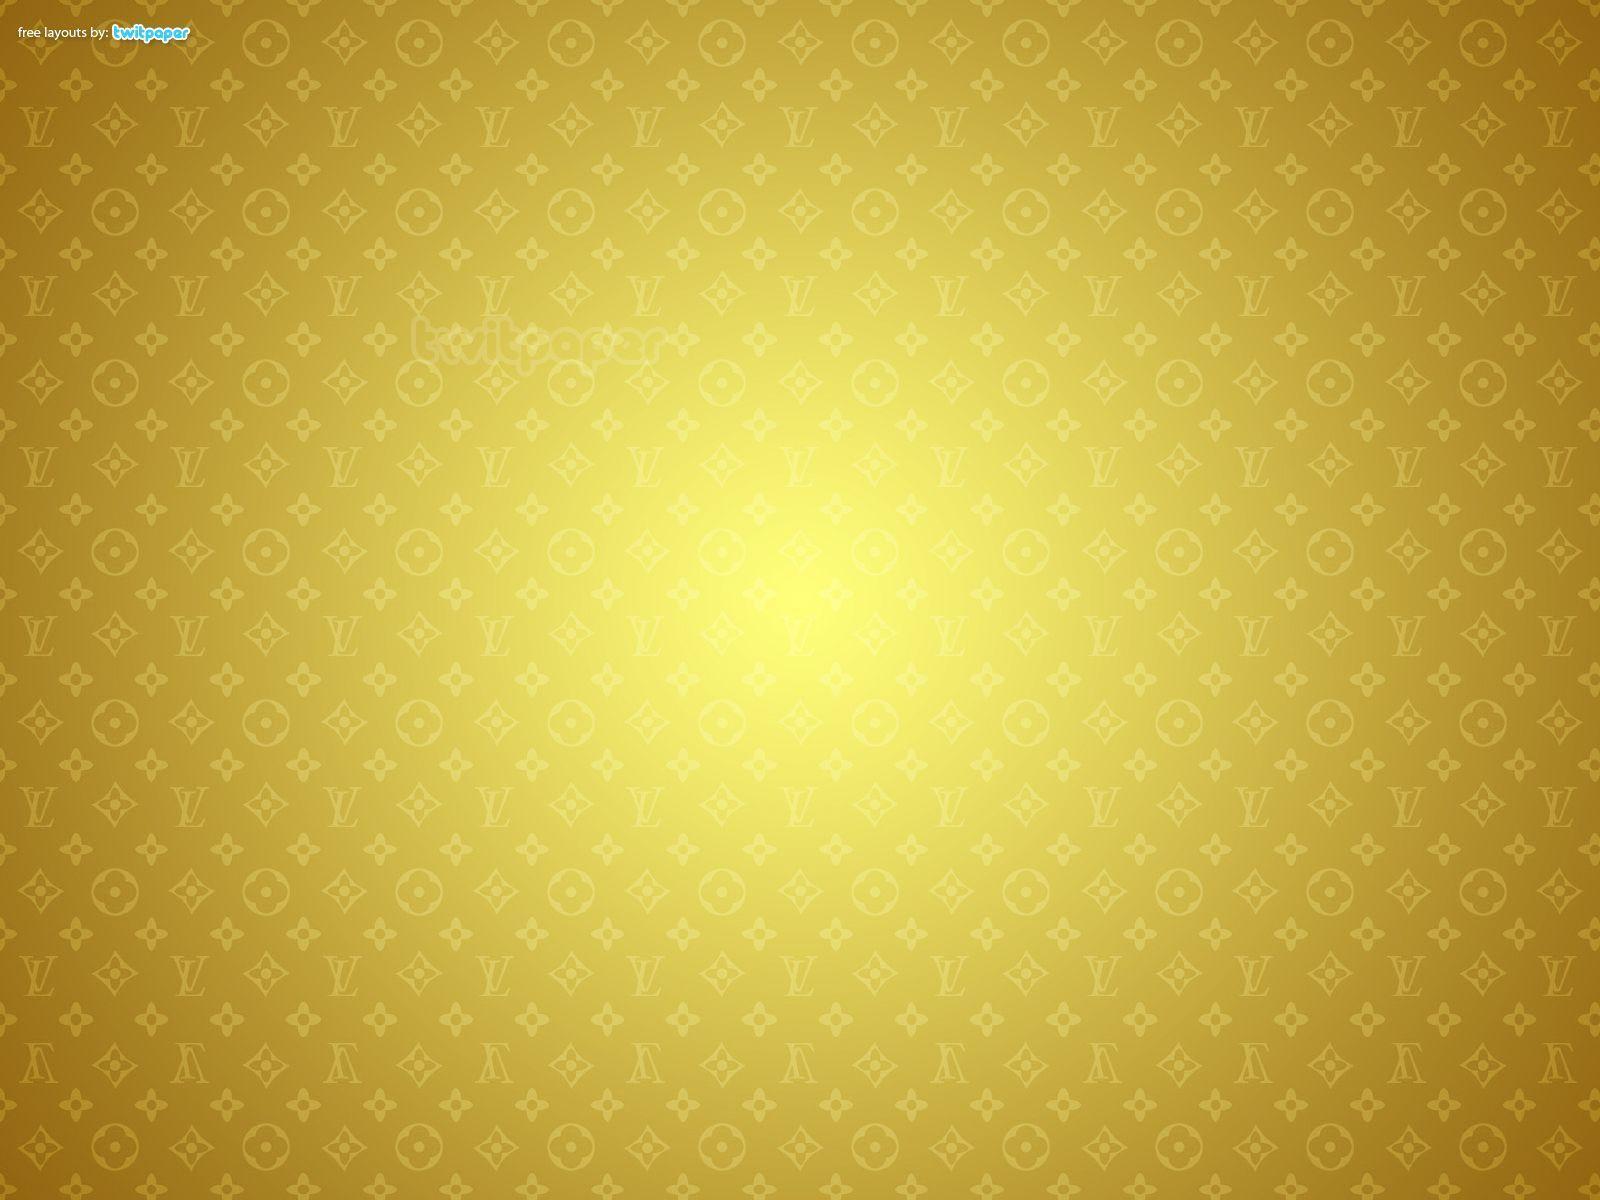 Gold Wallpaper Android Apps on Google Play 1920×1200 Gold